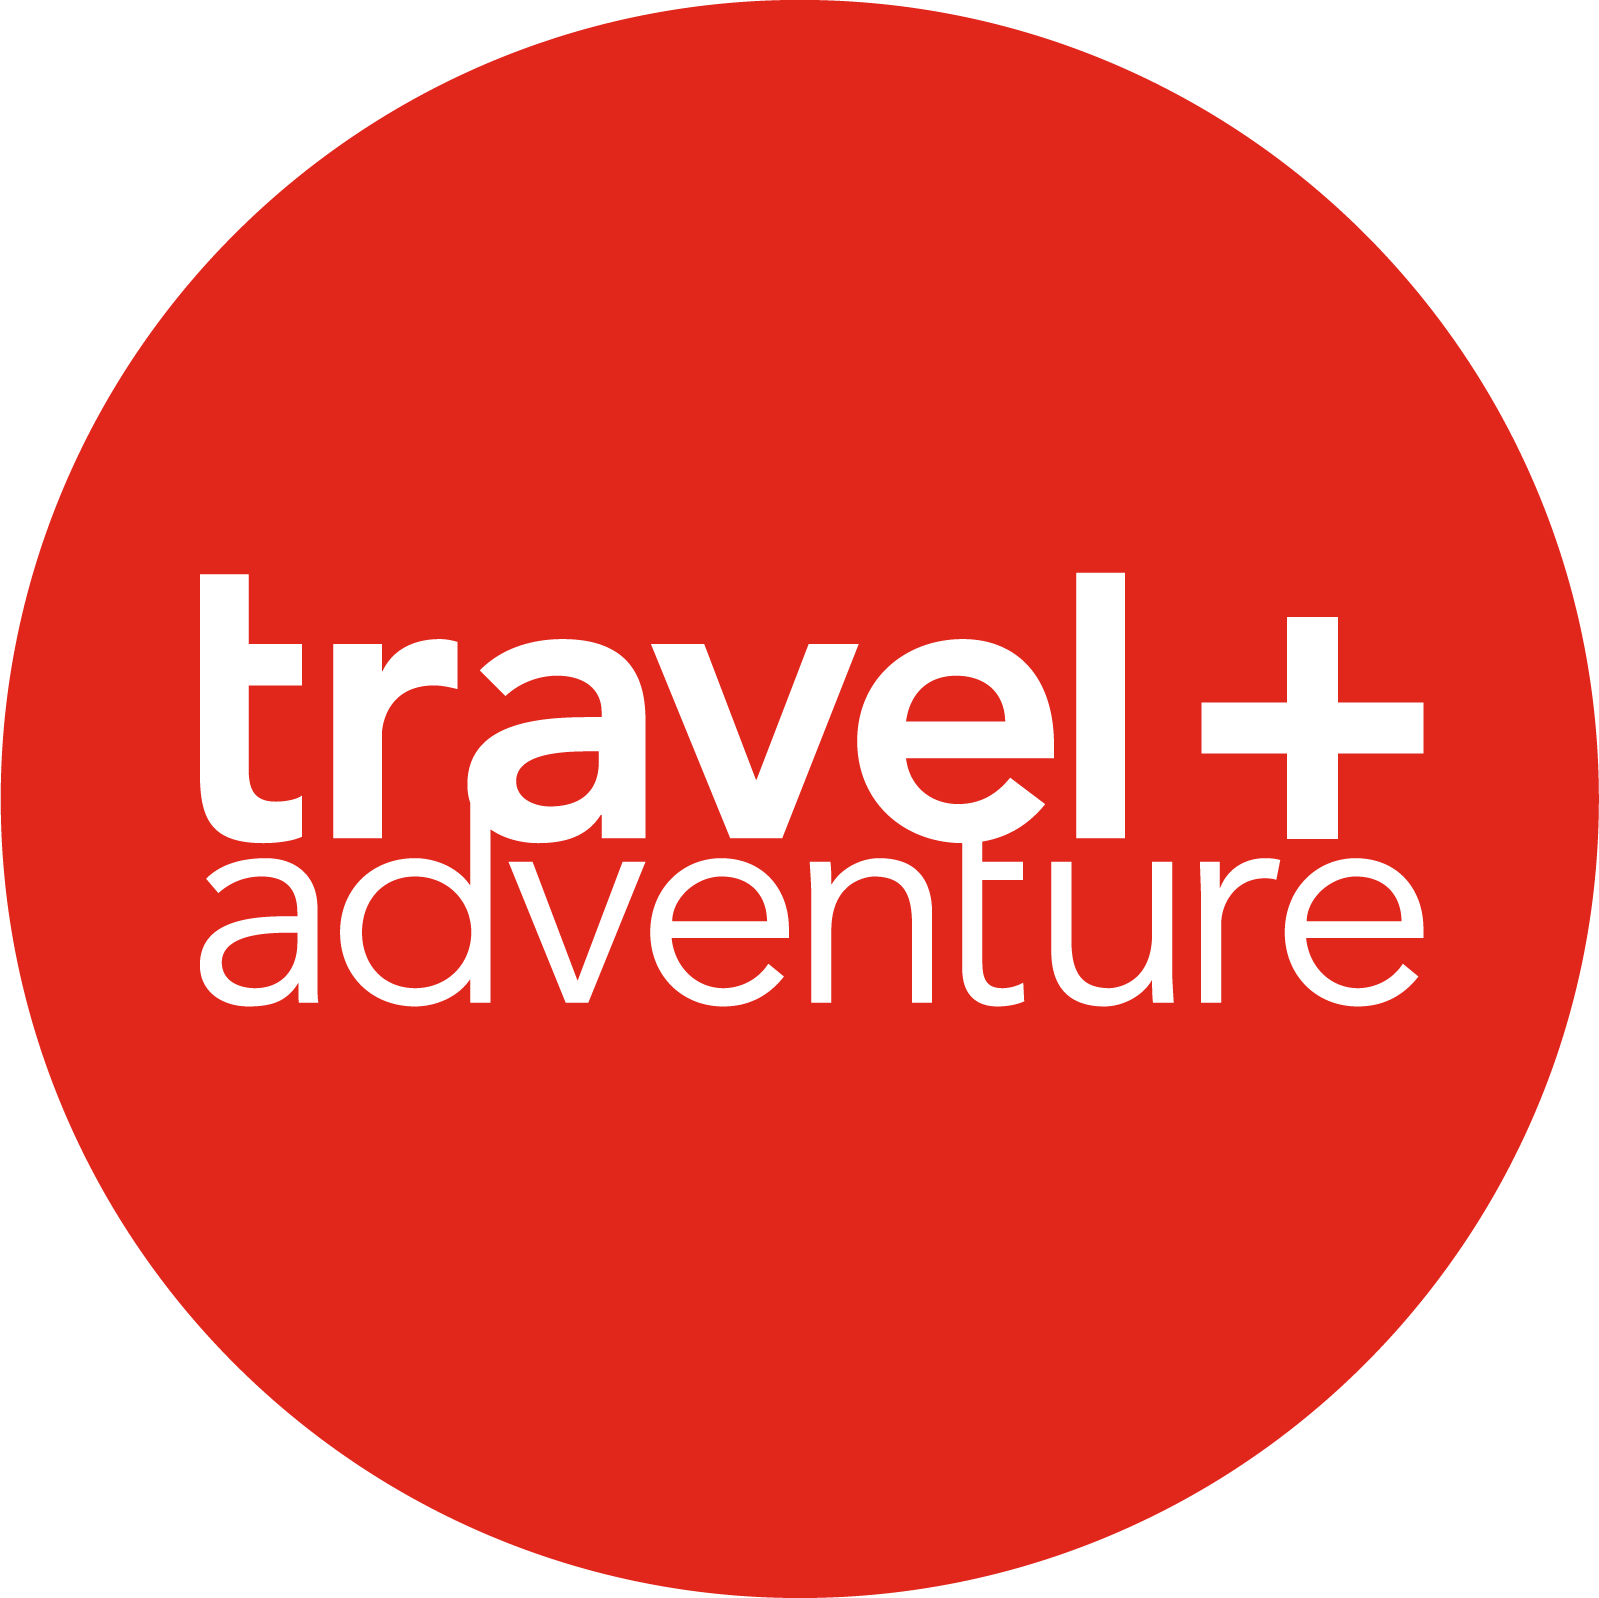 Traveling channel. Канал Travel+Adventure. Логотип Travel+Adventure. Логотип канала Travel+Adventure. Телеканал Travel Adventure HD.